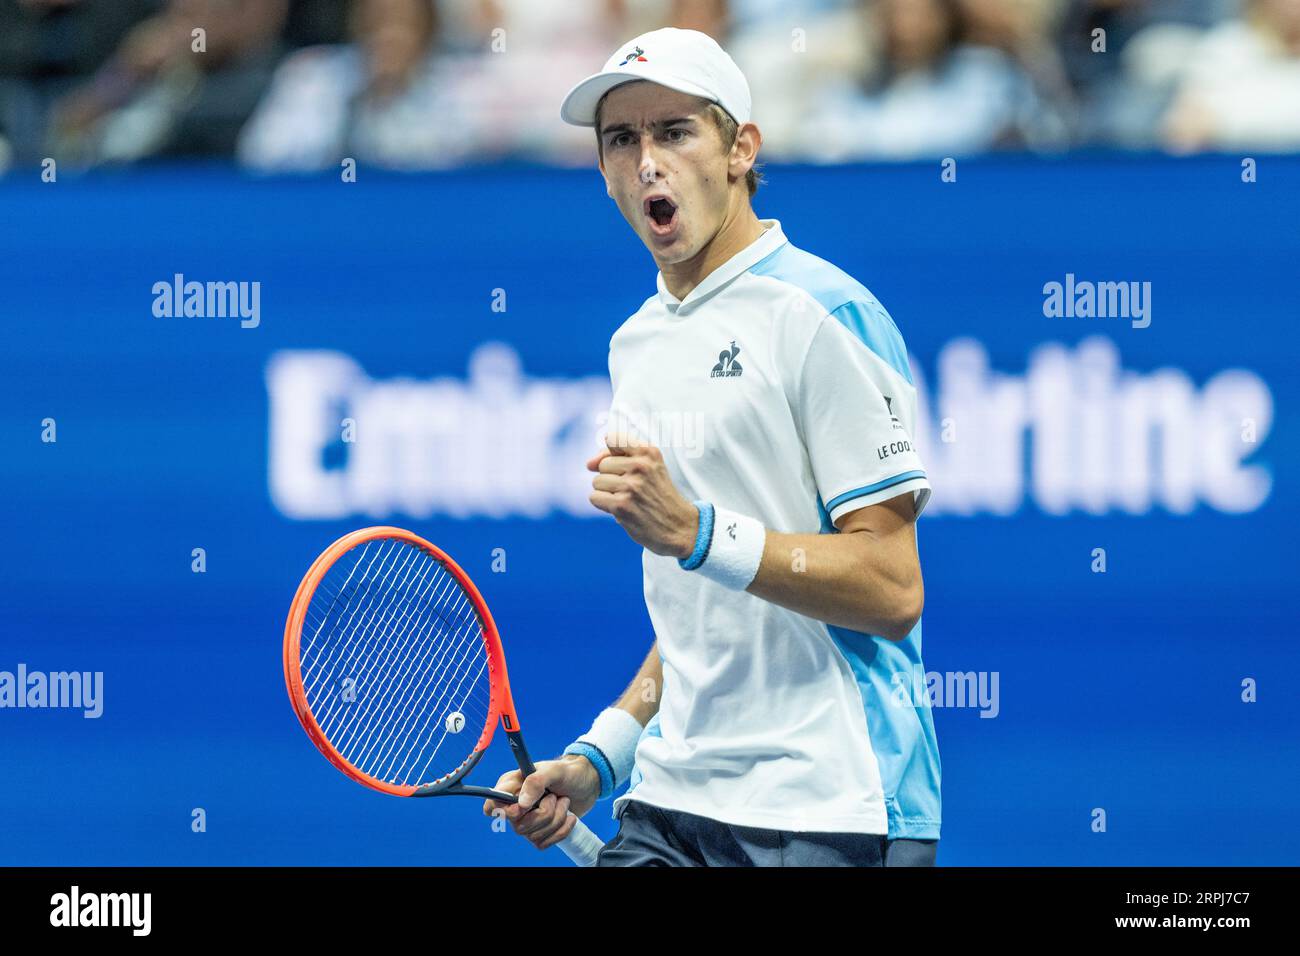 Carlos Alcaraz of Spain reacts during 4th round against Matteo Arnaldi of Italy at the US